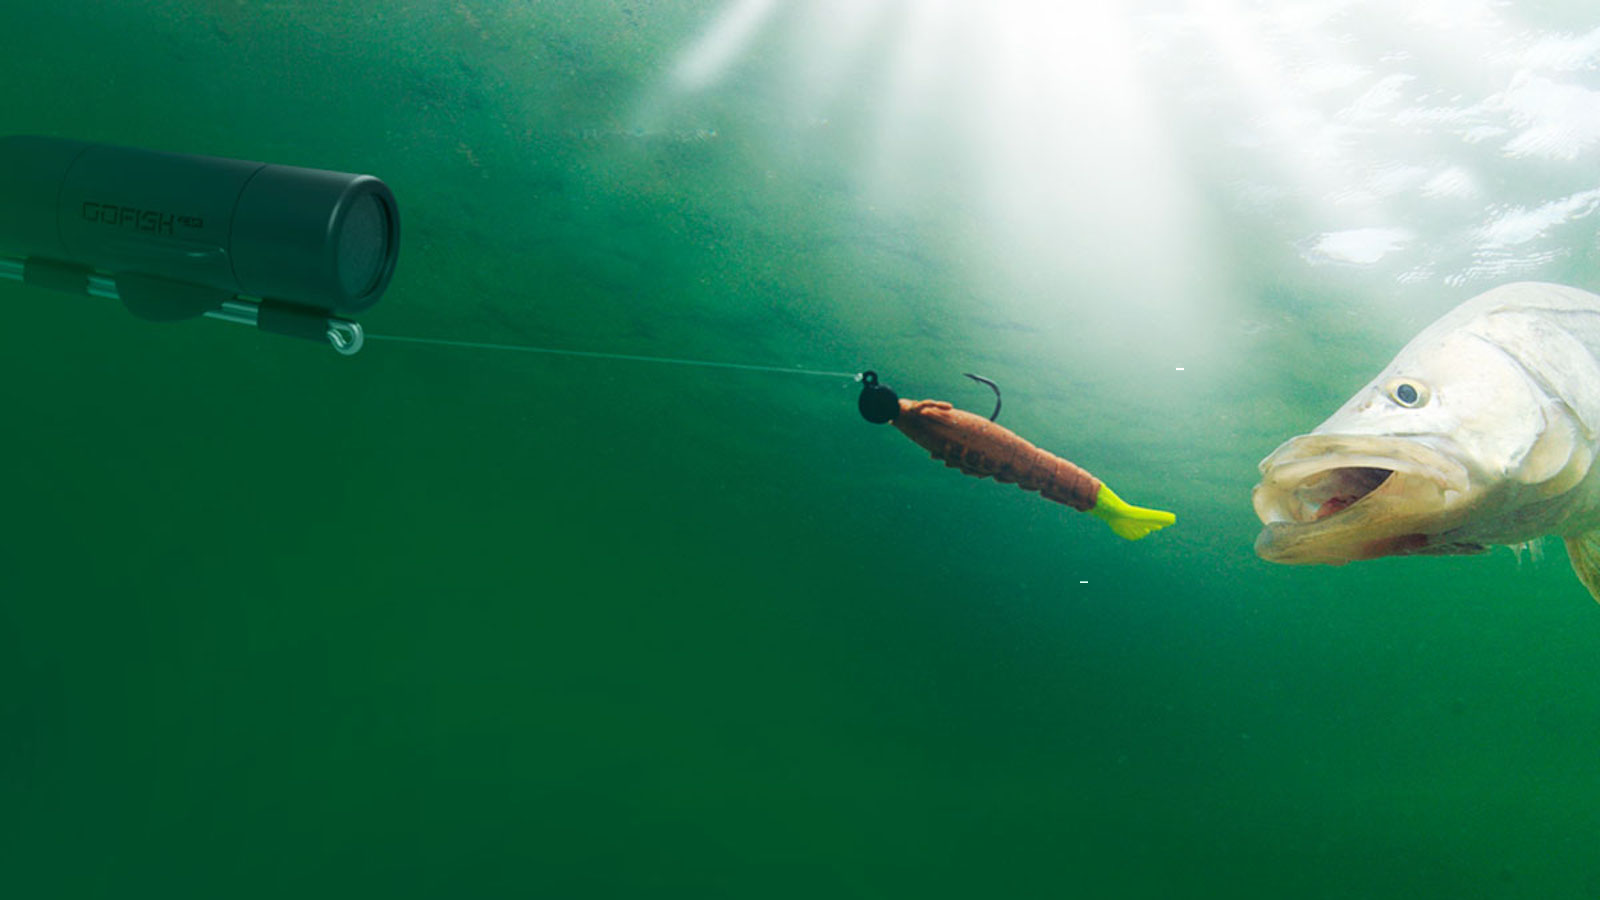 Capture your greatest catches on film with underwater fishing cam